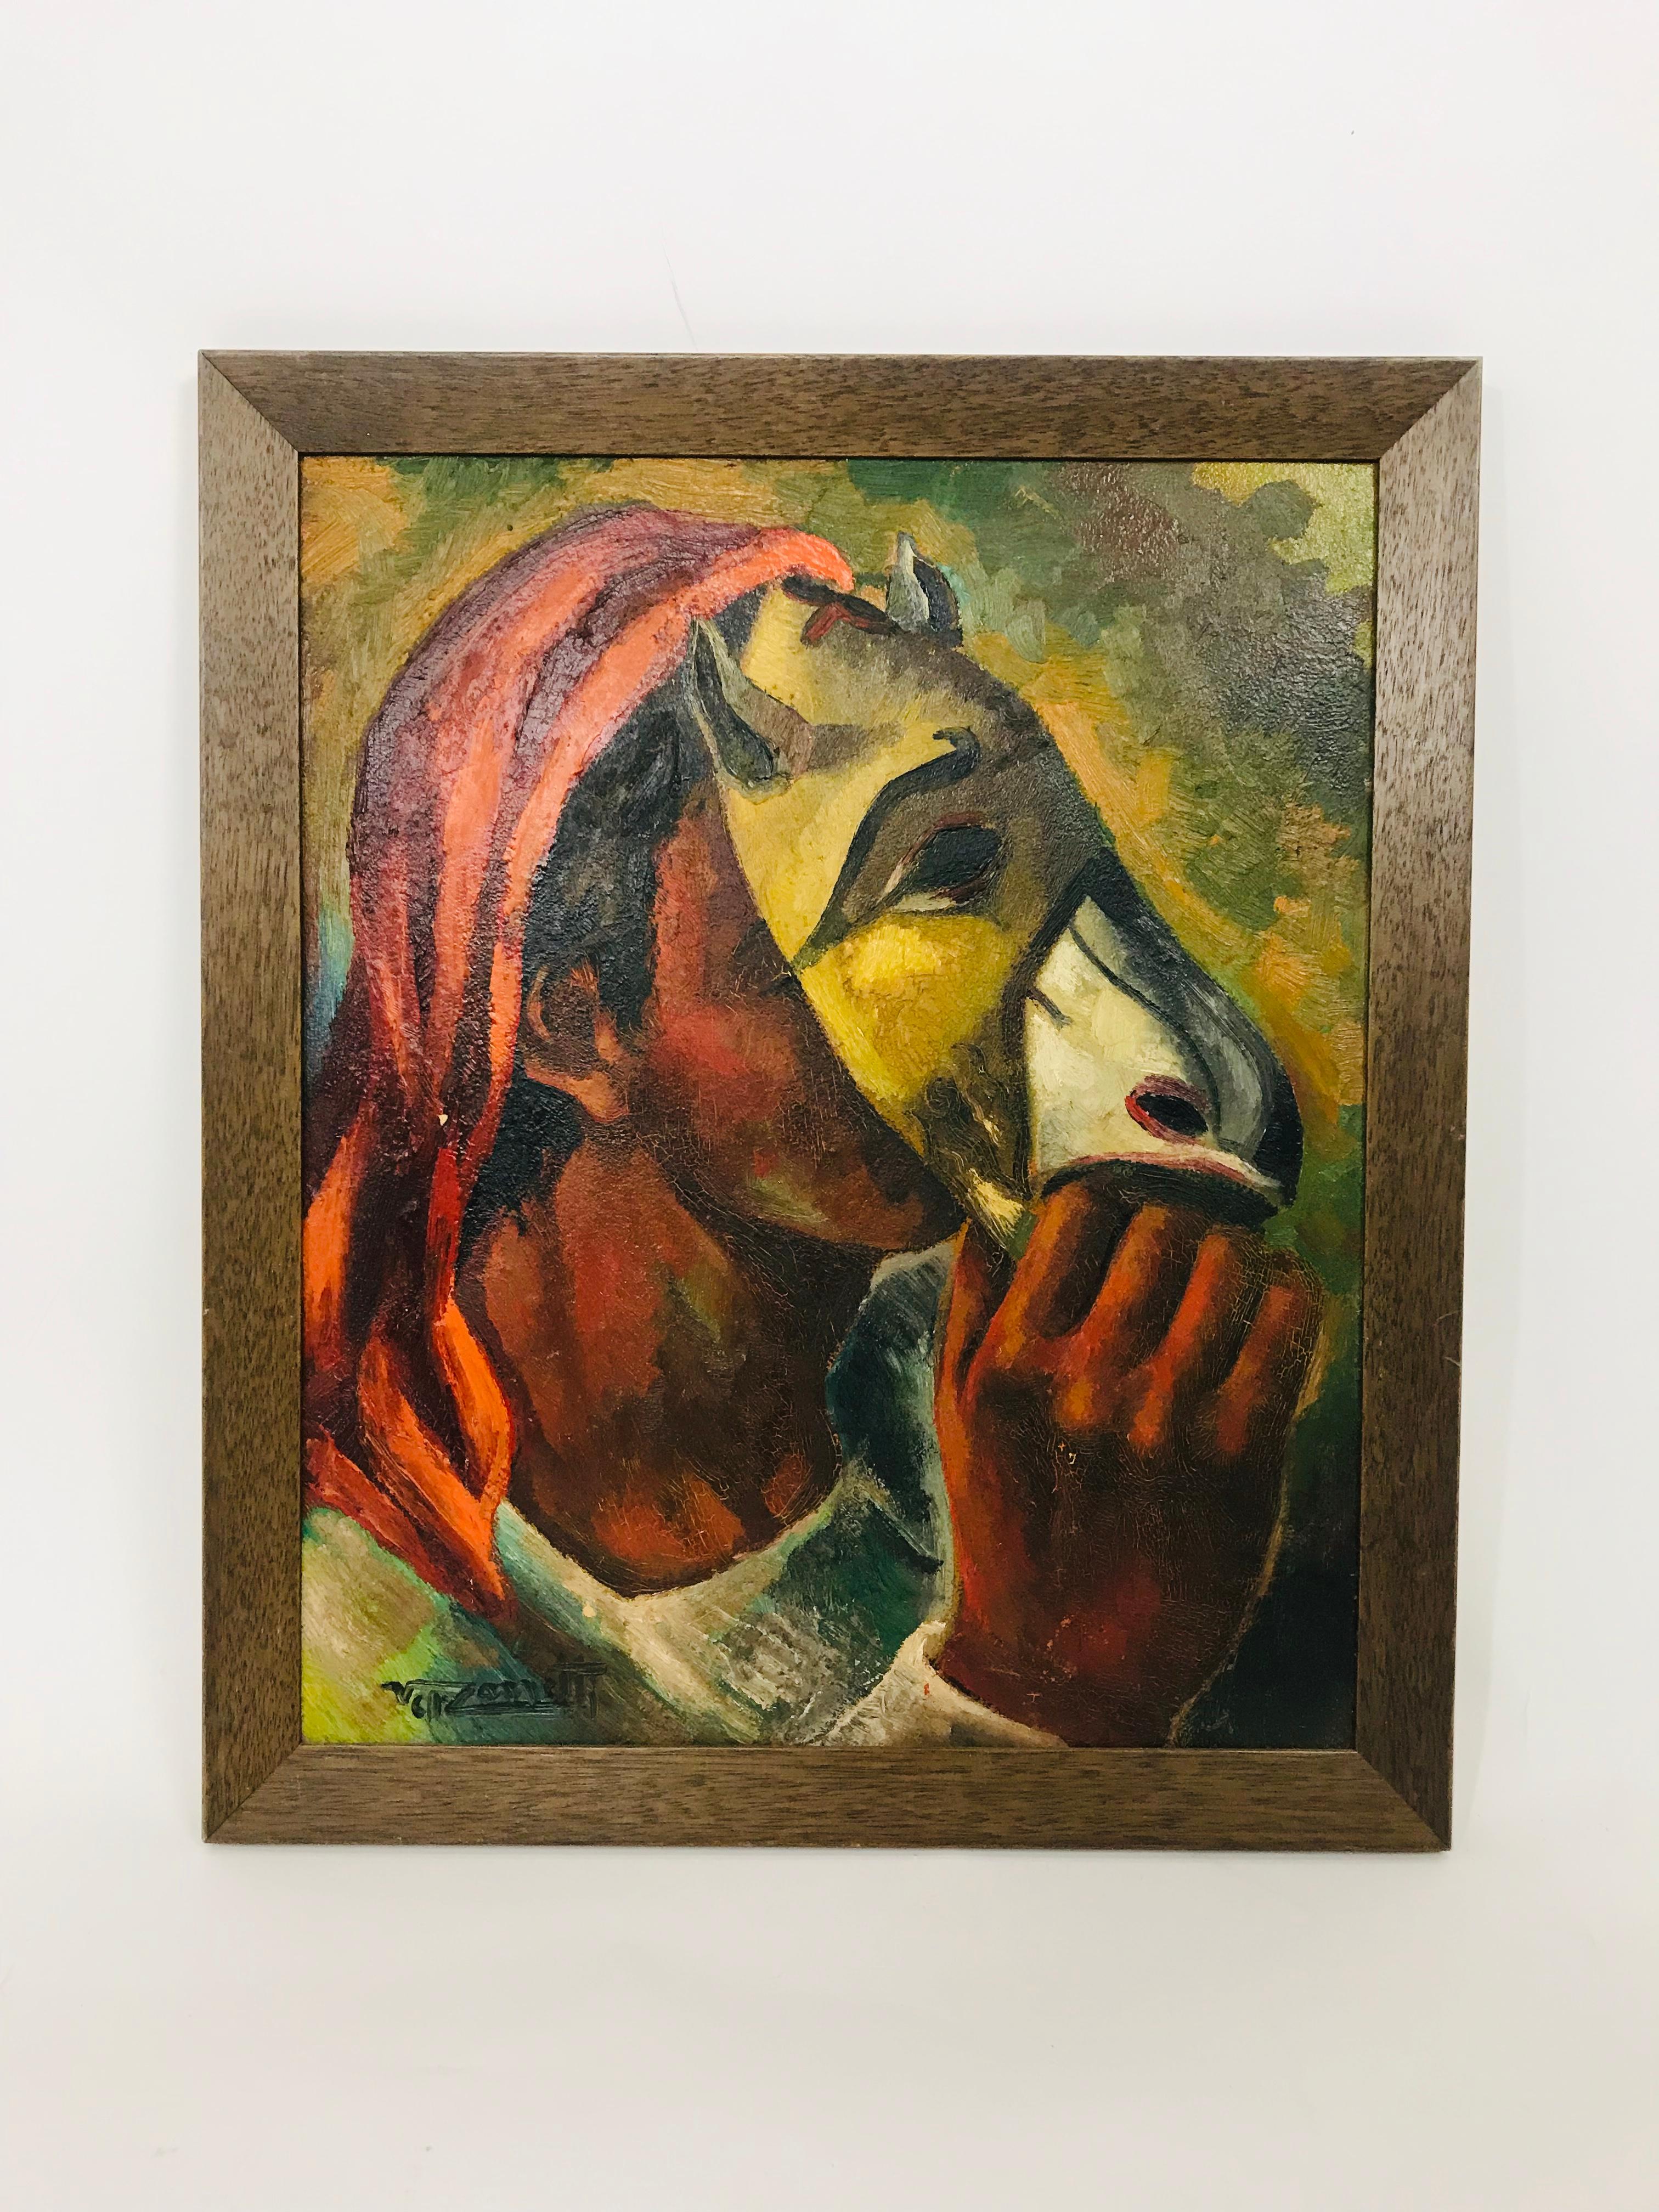 A masterful oil on board by esteemed Spanish artist Jose Vela Zanetti, depicting a boy with a mask, painted with yellow and white paint and adoring miniature black horns taking the form of a bull. The bull is a cultural, mythological, astrological,